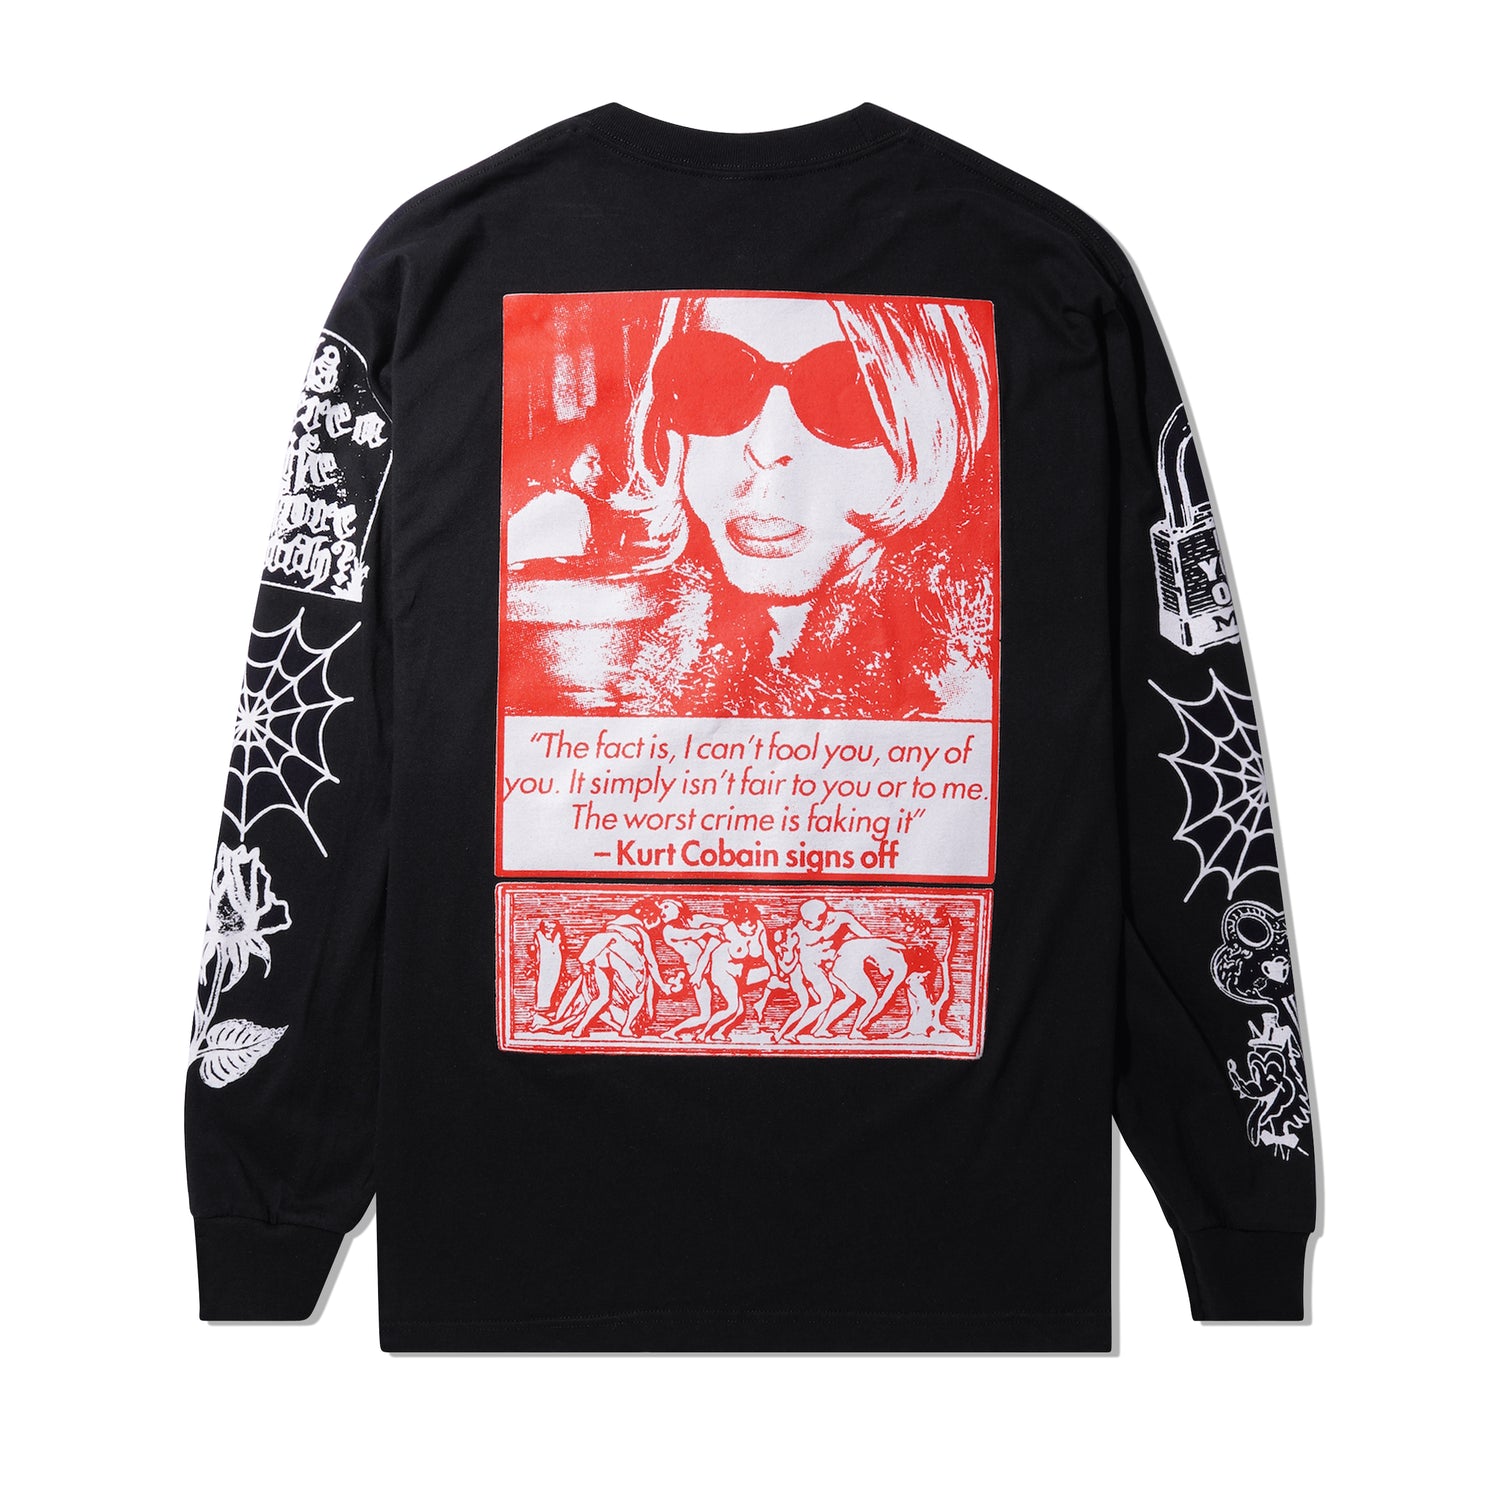 The Light Pours Out Of Me L/S Tee, Black